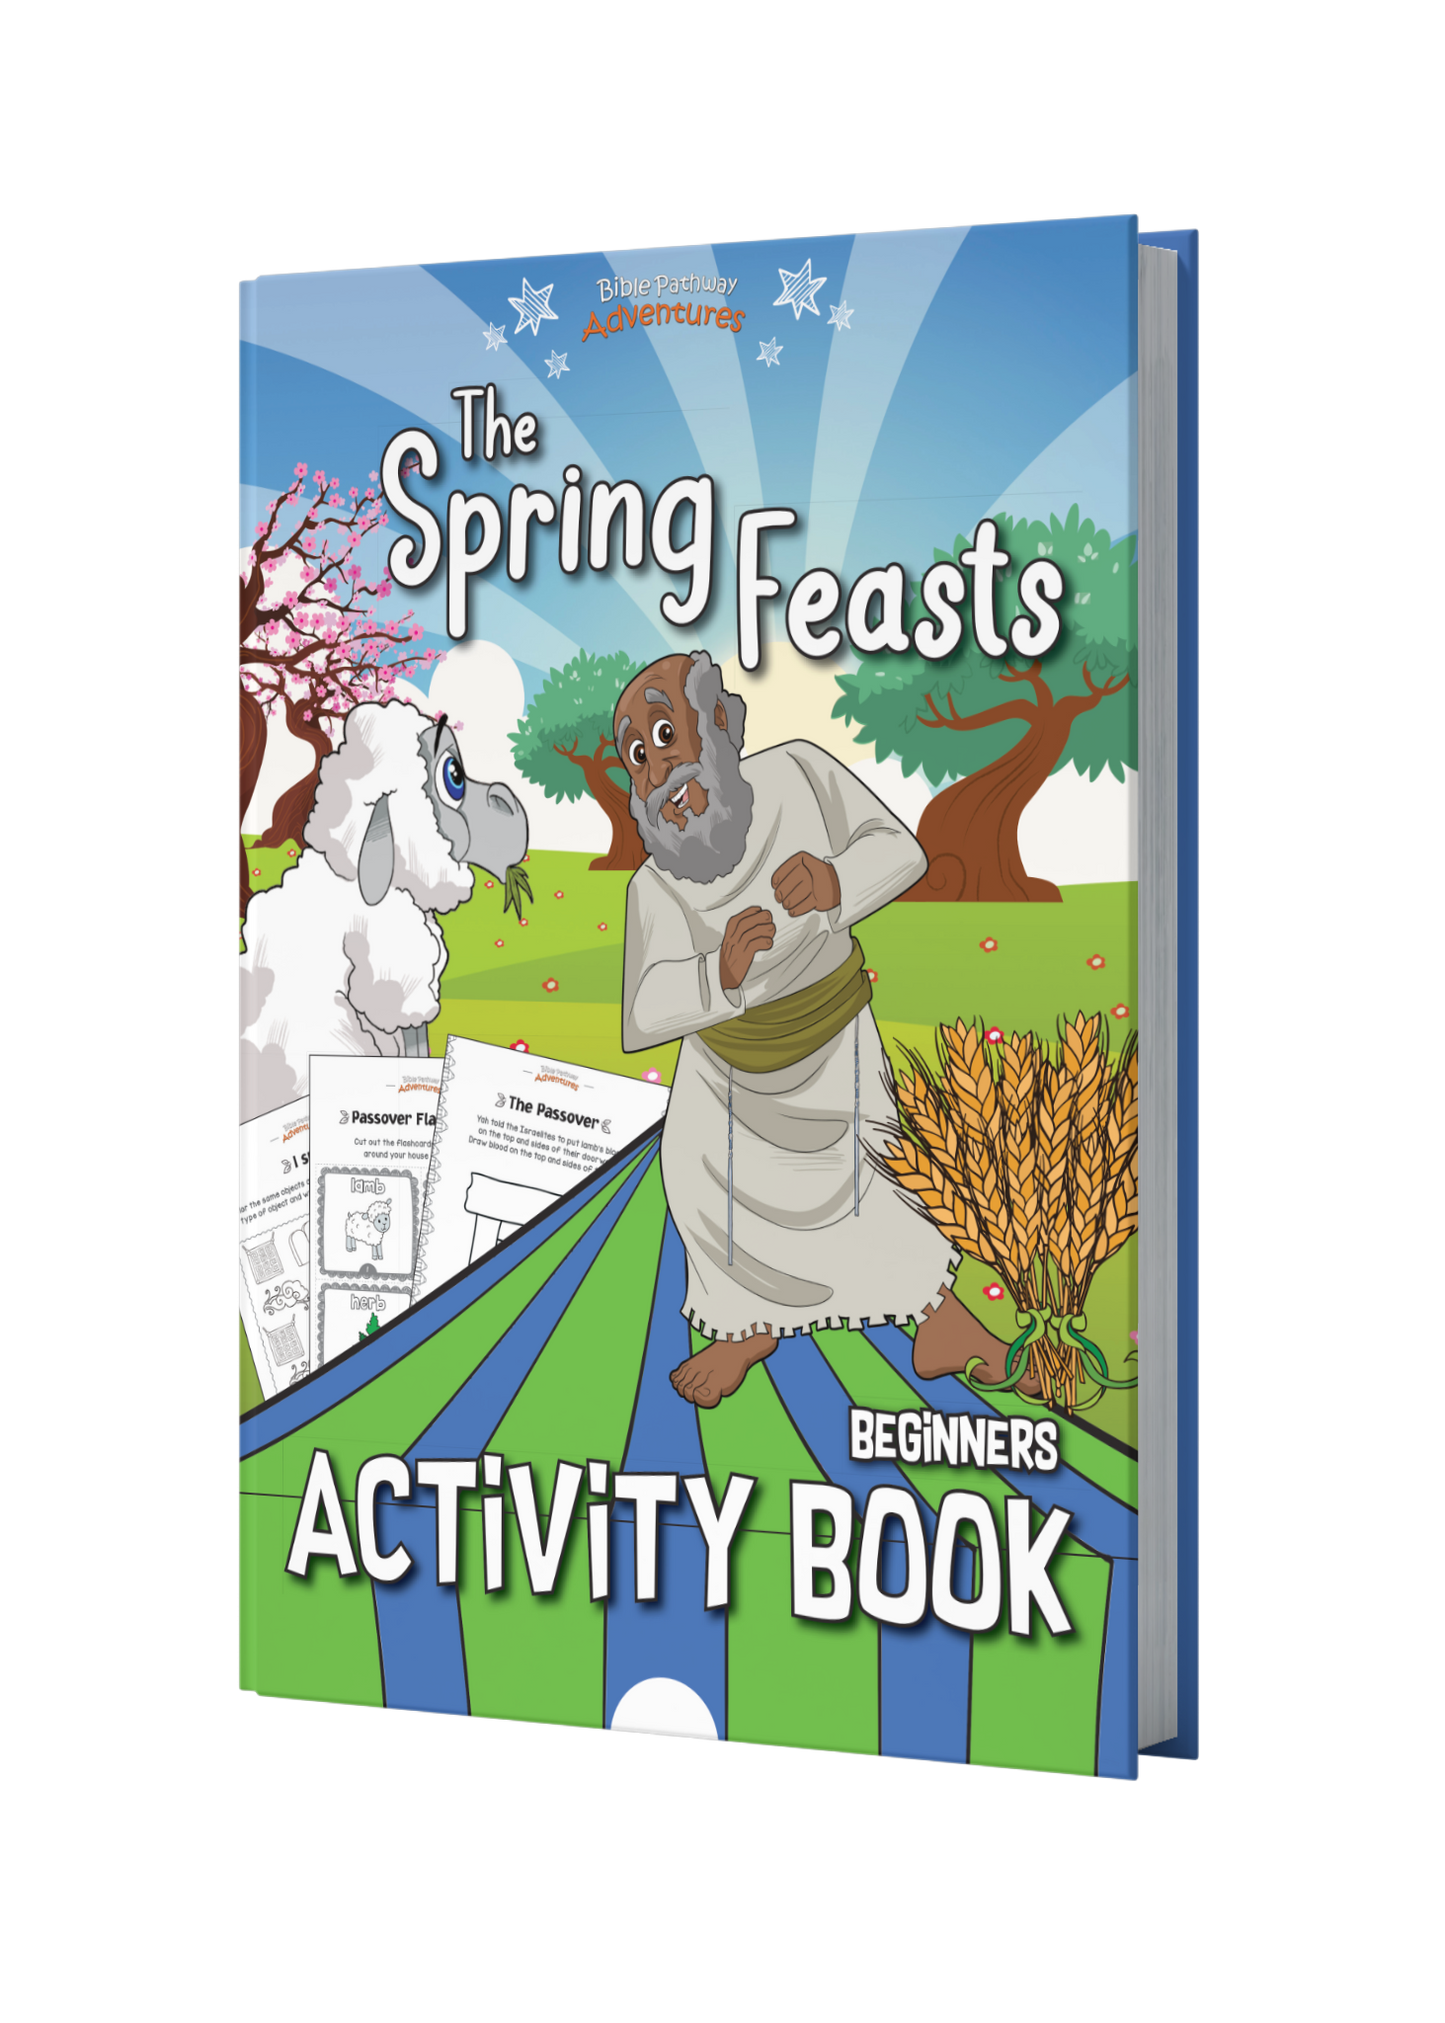 The Spring Feasts Activity Book for Beginners (paperback)